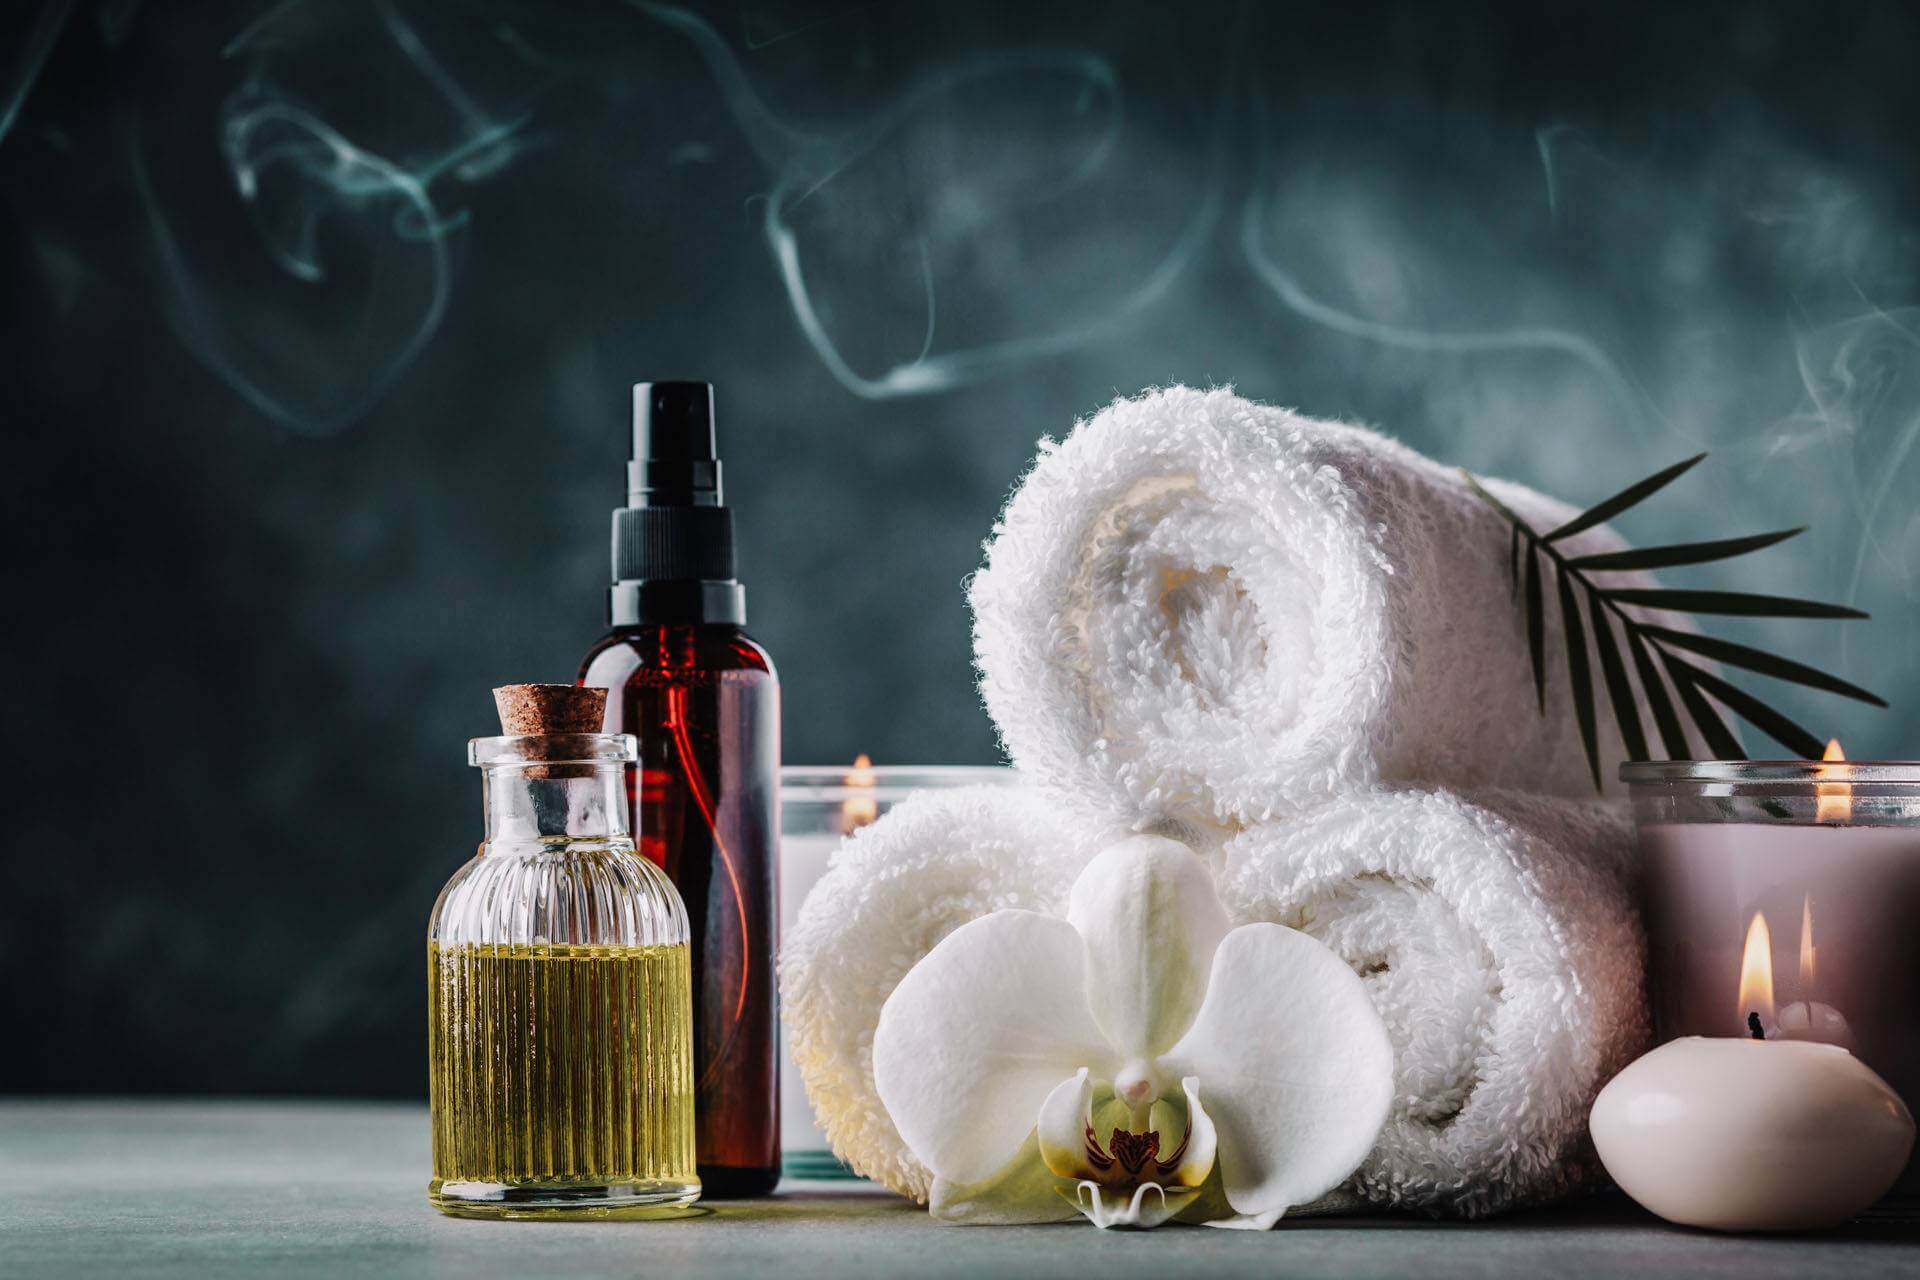 Aromatherapy, spa, beauty treatment and wellness background with massage oil, orchid flowers, towels, cosmetic products and burning candles.